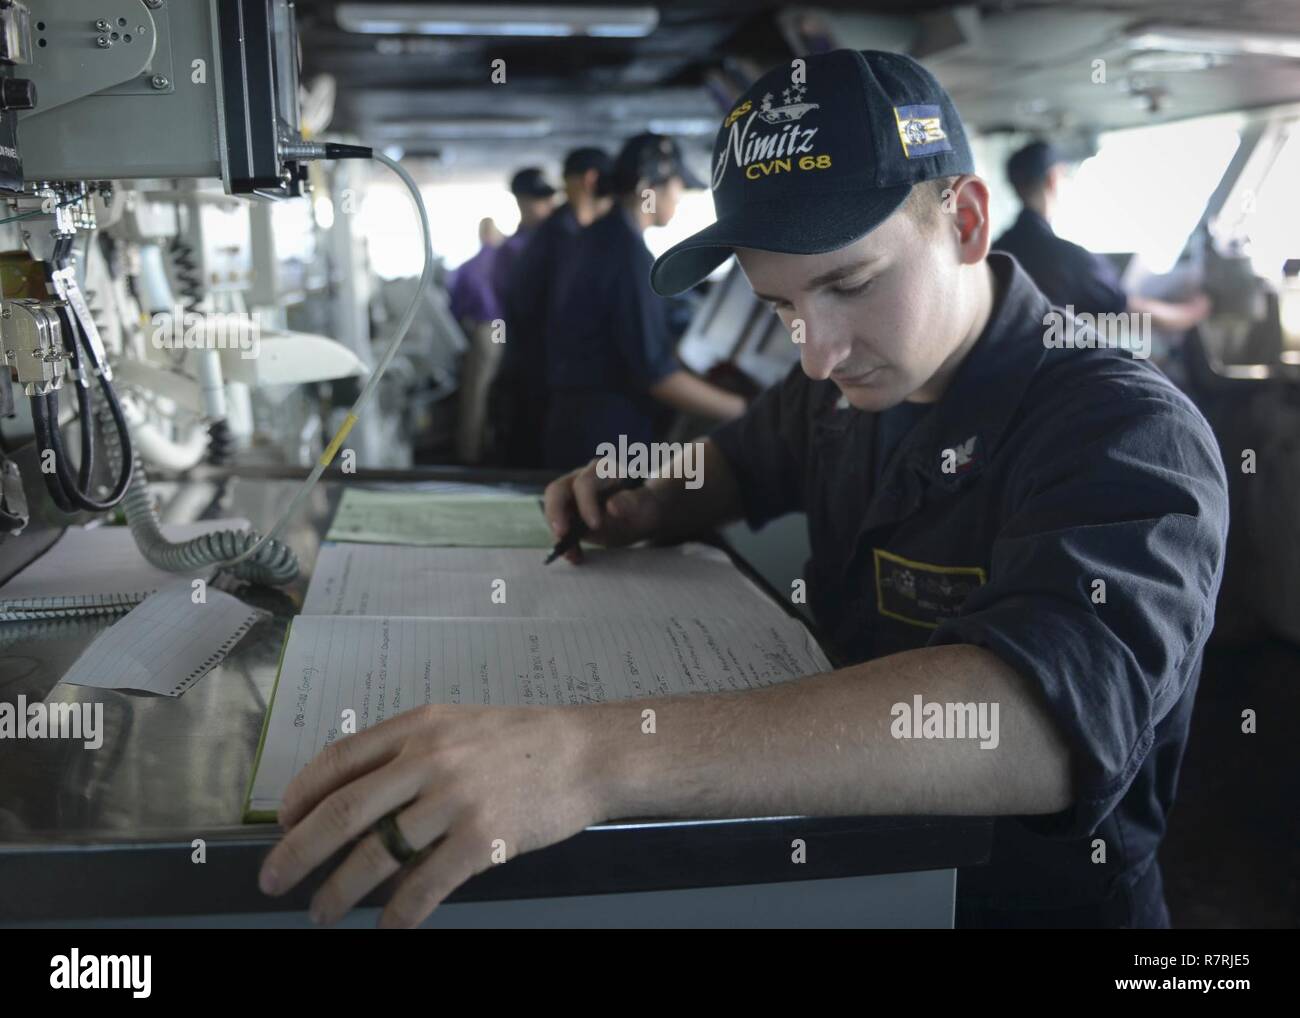 PACIFIC OCEAN (March 31, 2017) Boatswain's Mate 3rd Class Eric Hunt, assigned to the aircraft carrier USS Nimitz (CVN 68), reviews the ship's log before making an entry while underway. Nimitz is underway conducting a composite training unit exercise with it's carrier strike group in preparation for an upcoming deployment. Stock Photo